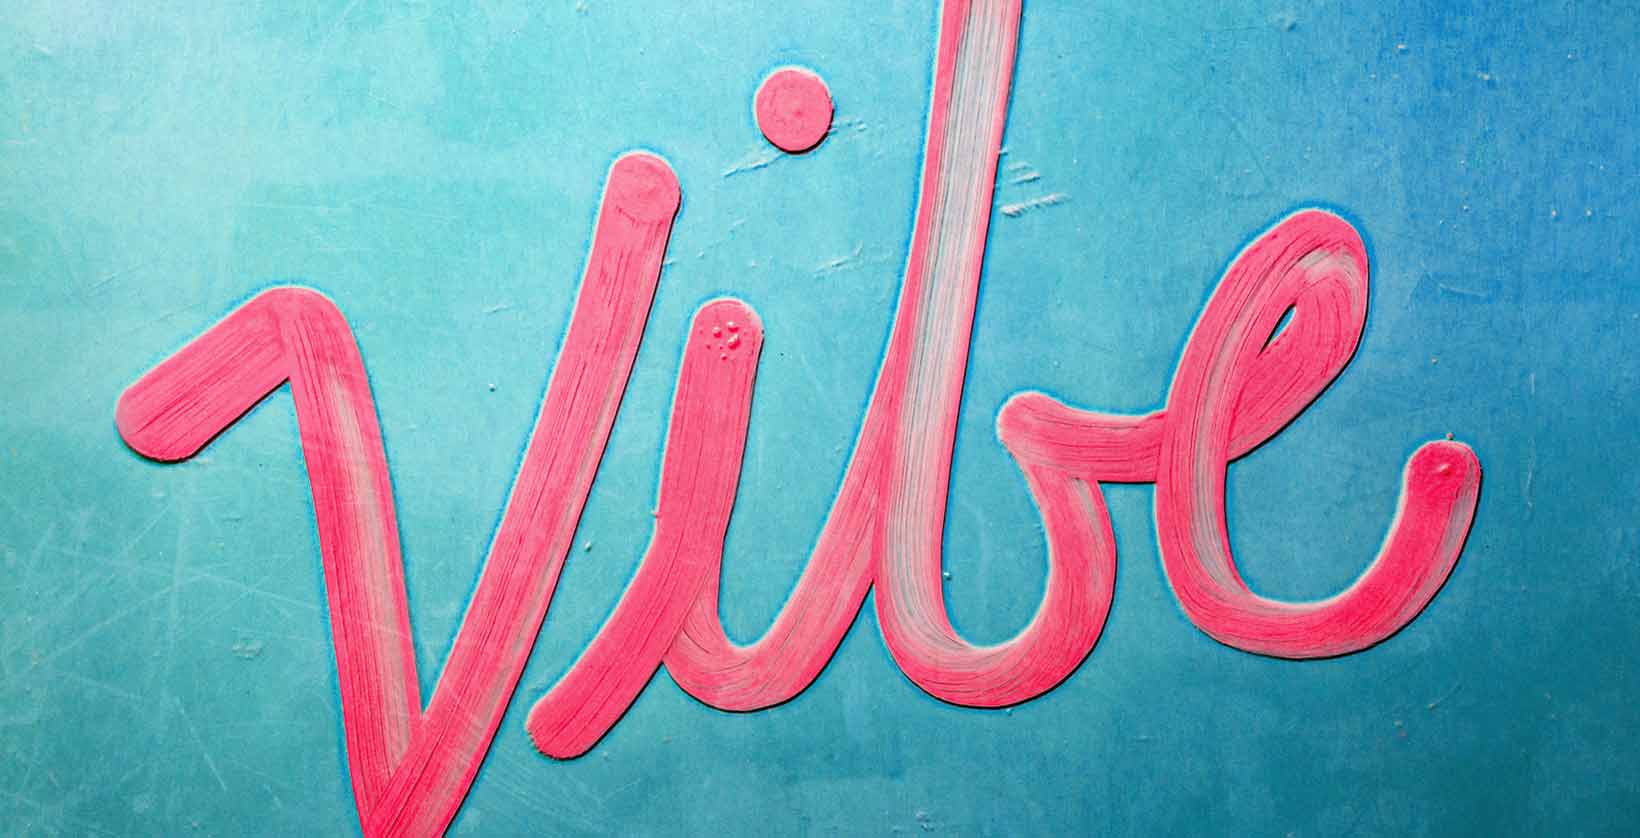 Painted cursive type that says Vibe